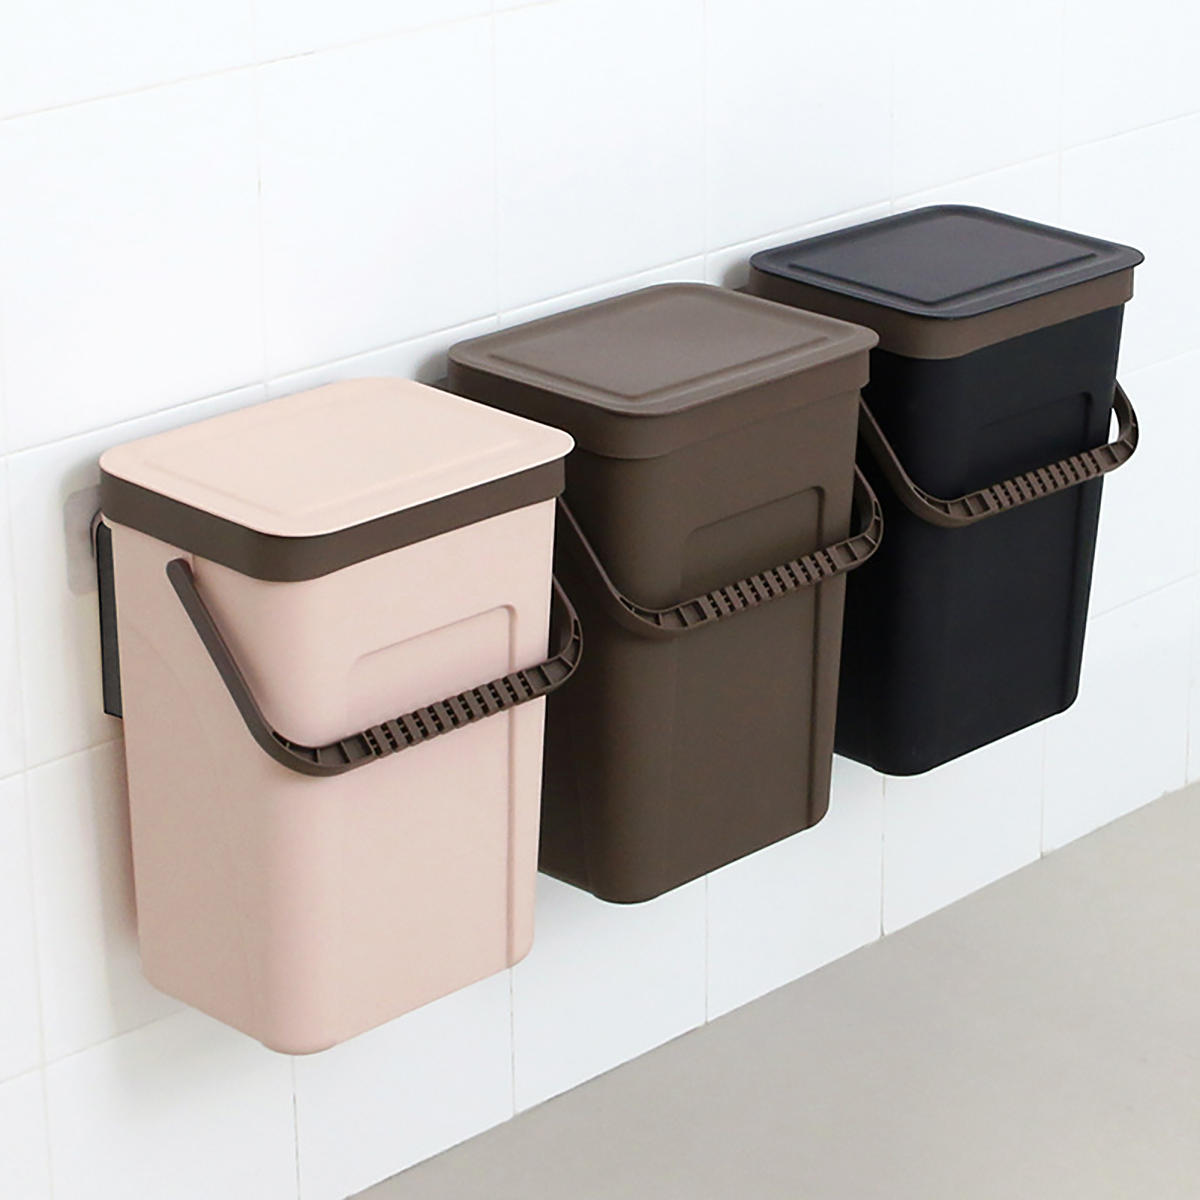 Kitchen Trash Can Wall Mounted Hanging Waste Bins for Bathroom Toilet Waste Storage